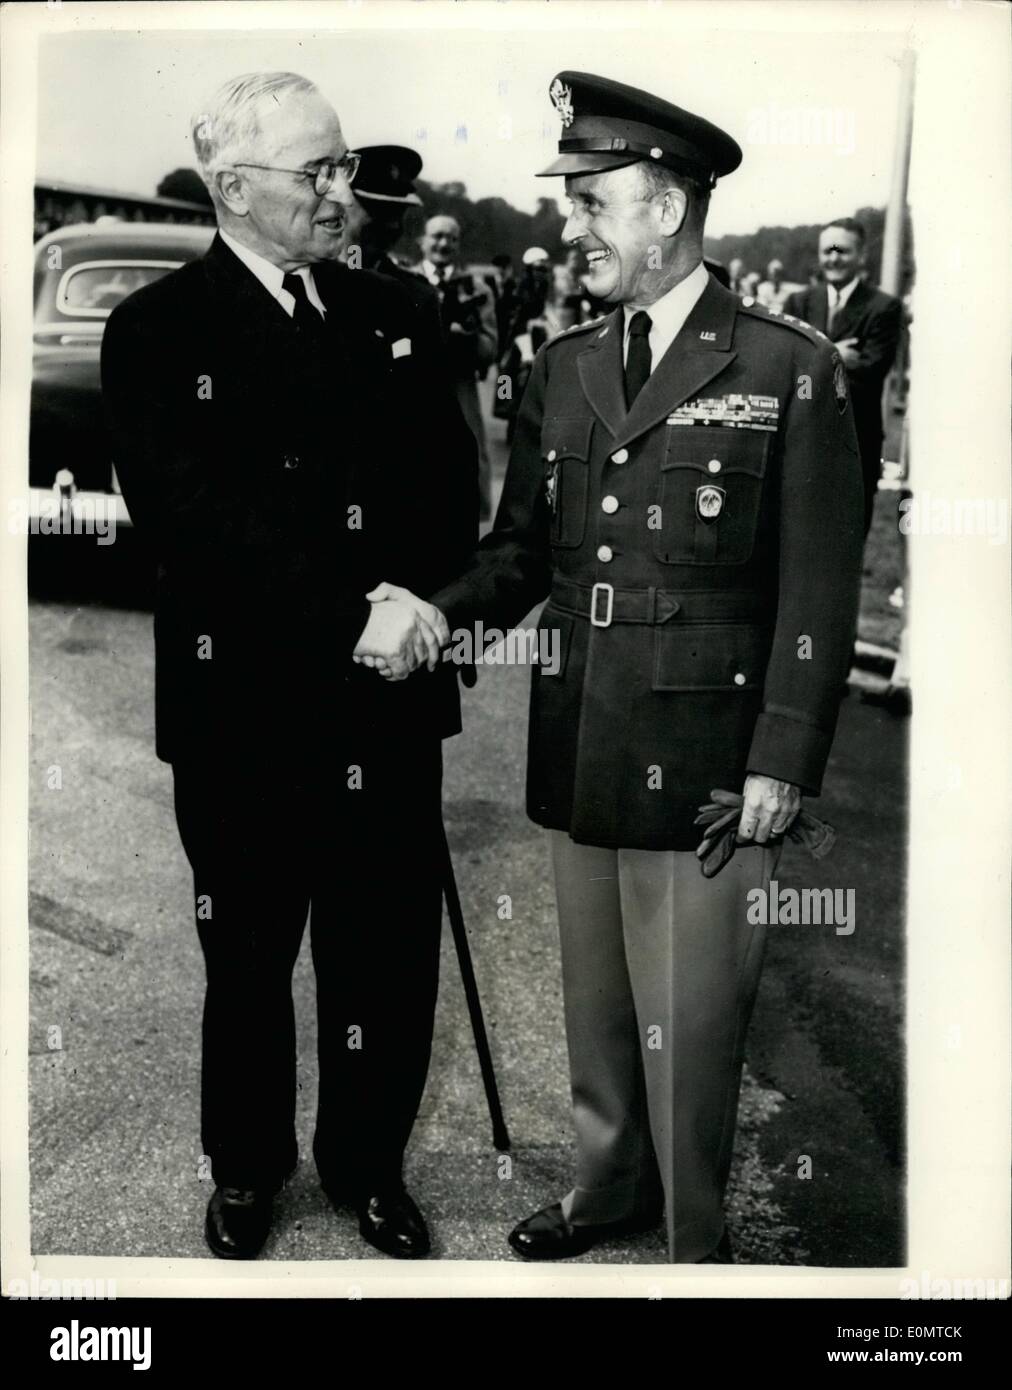 Jun. 06, 1956 - Mr. Truman visits shape : Mr. Harry Truman, former president of the united states, yesterday paid a visit to Shape. Photo shows Mr. Harry Truman (left) is greeted by General Alfred M. Gruenther, supreme allied commander Europe. Stock Photo